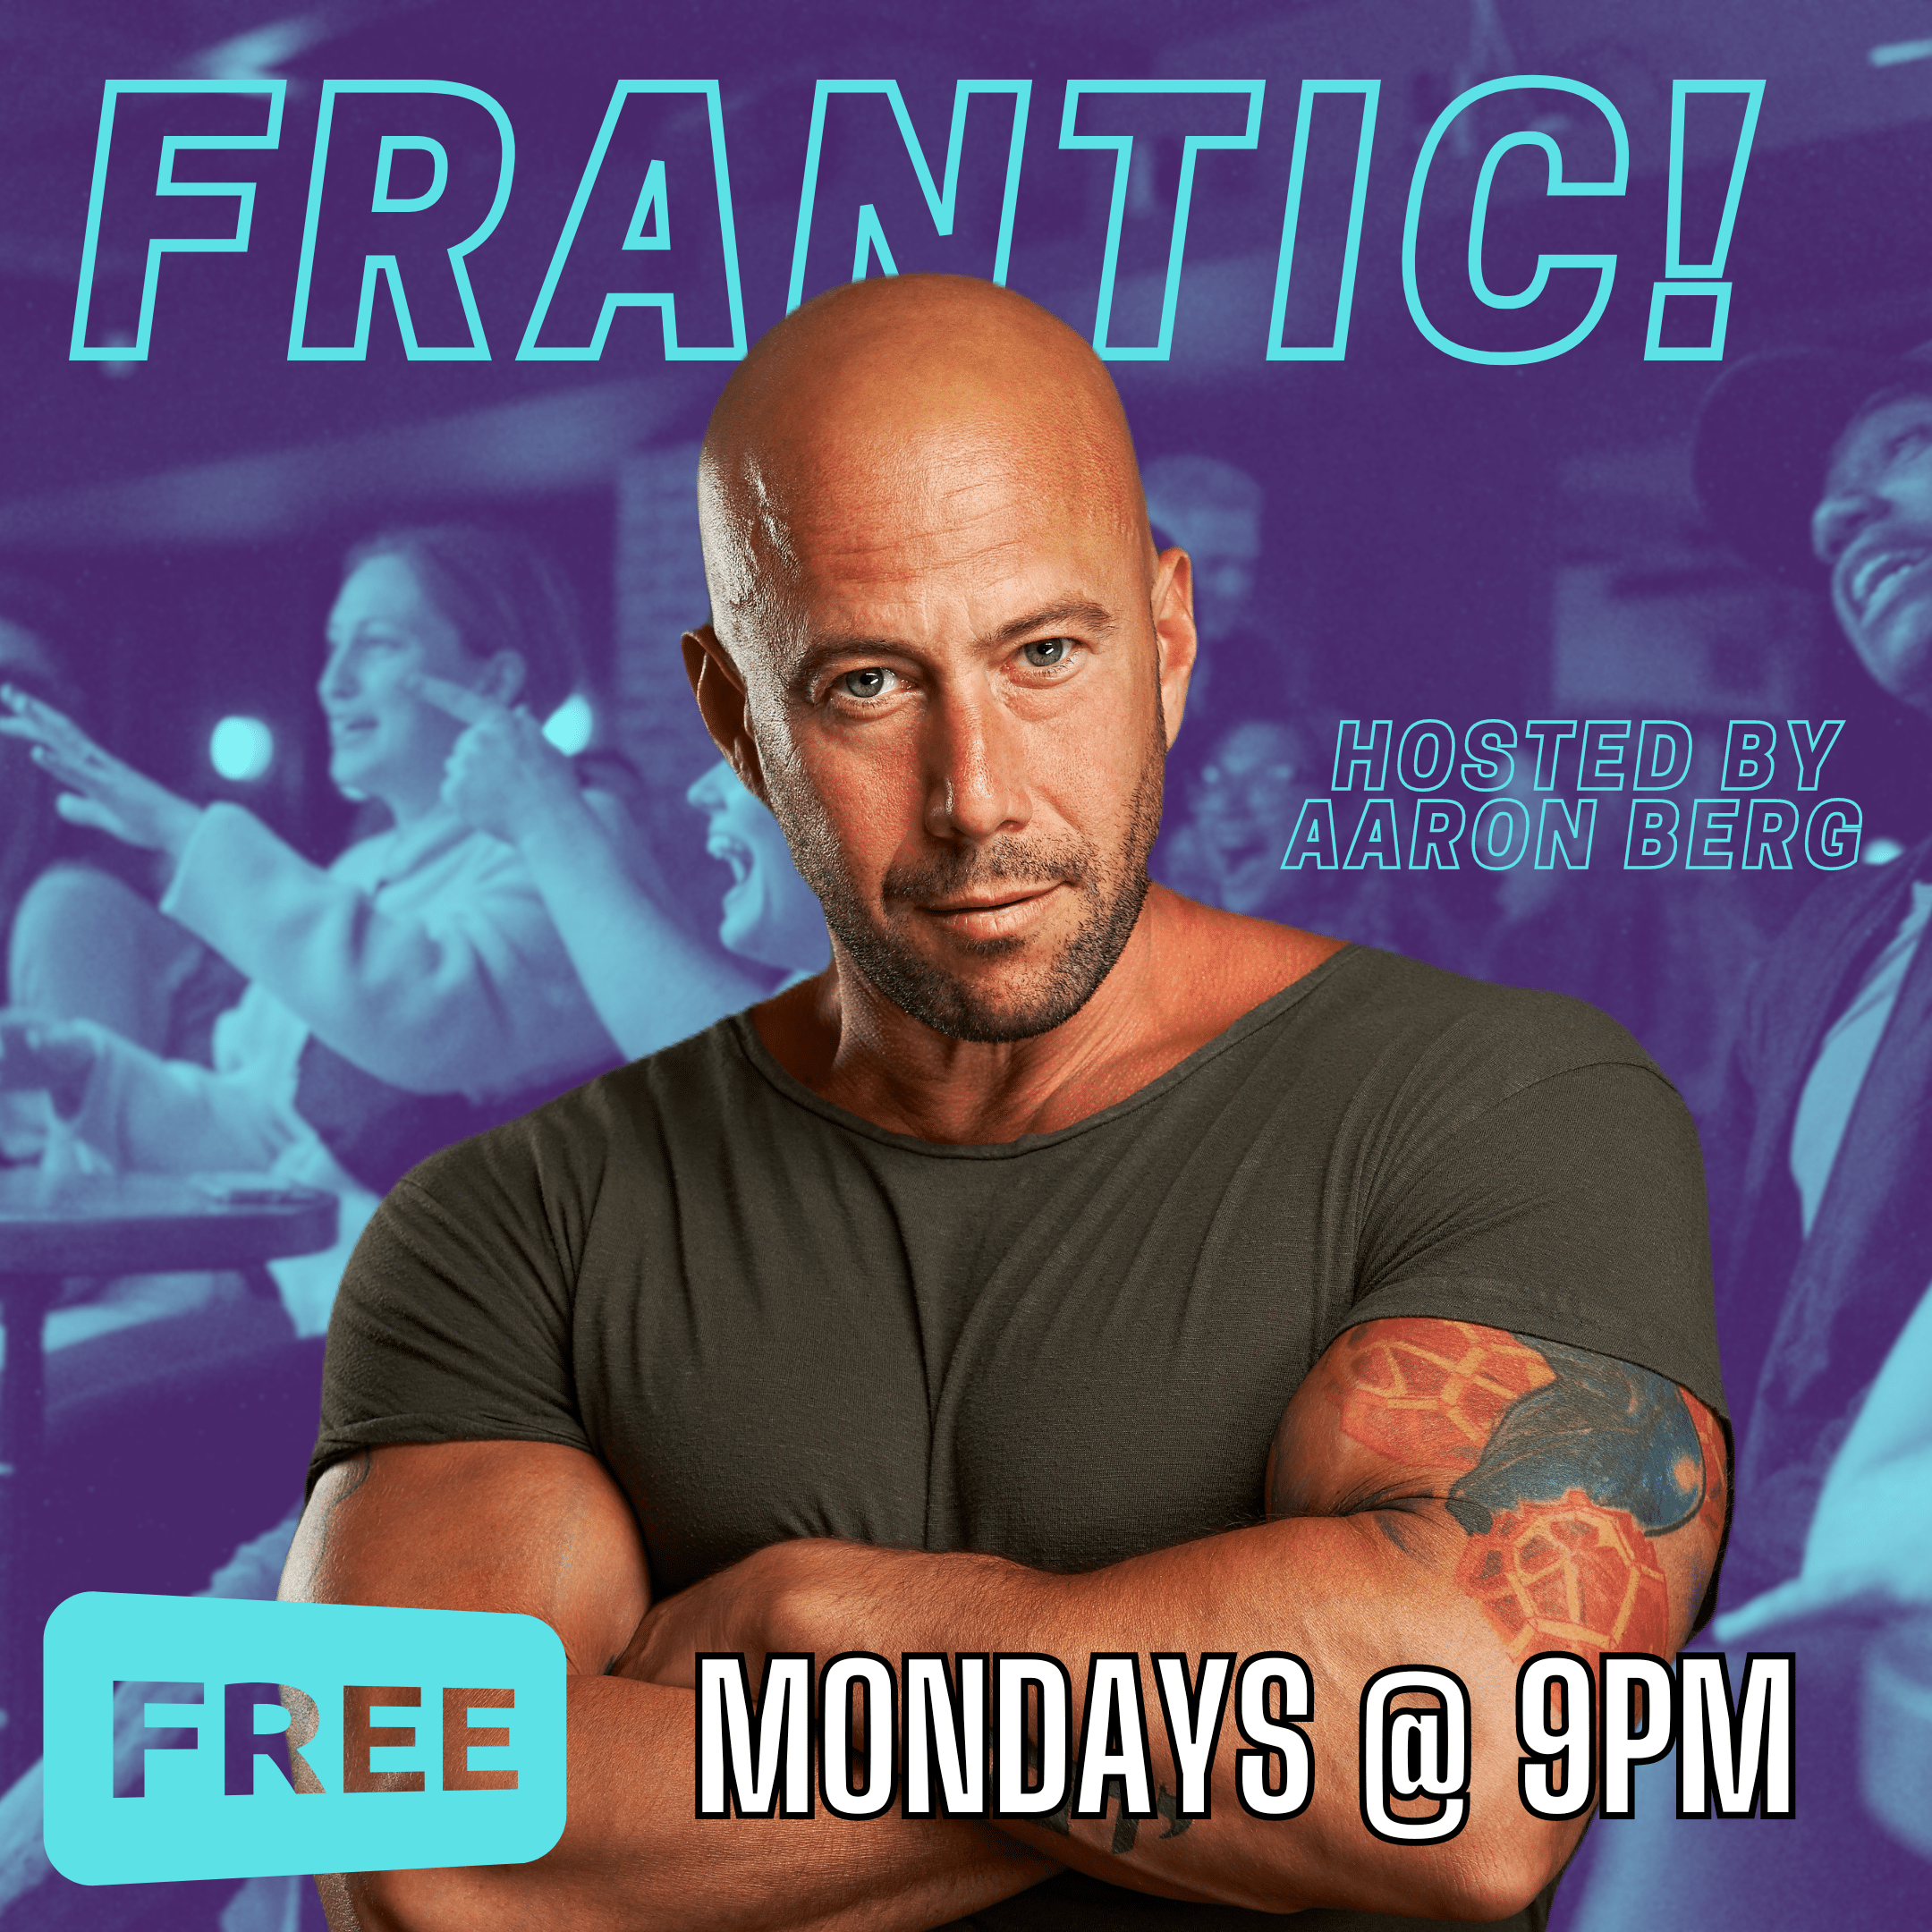 Frantic! FREE Show Hosted by Aaron Berg